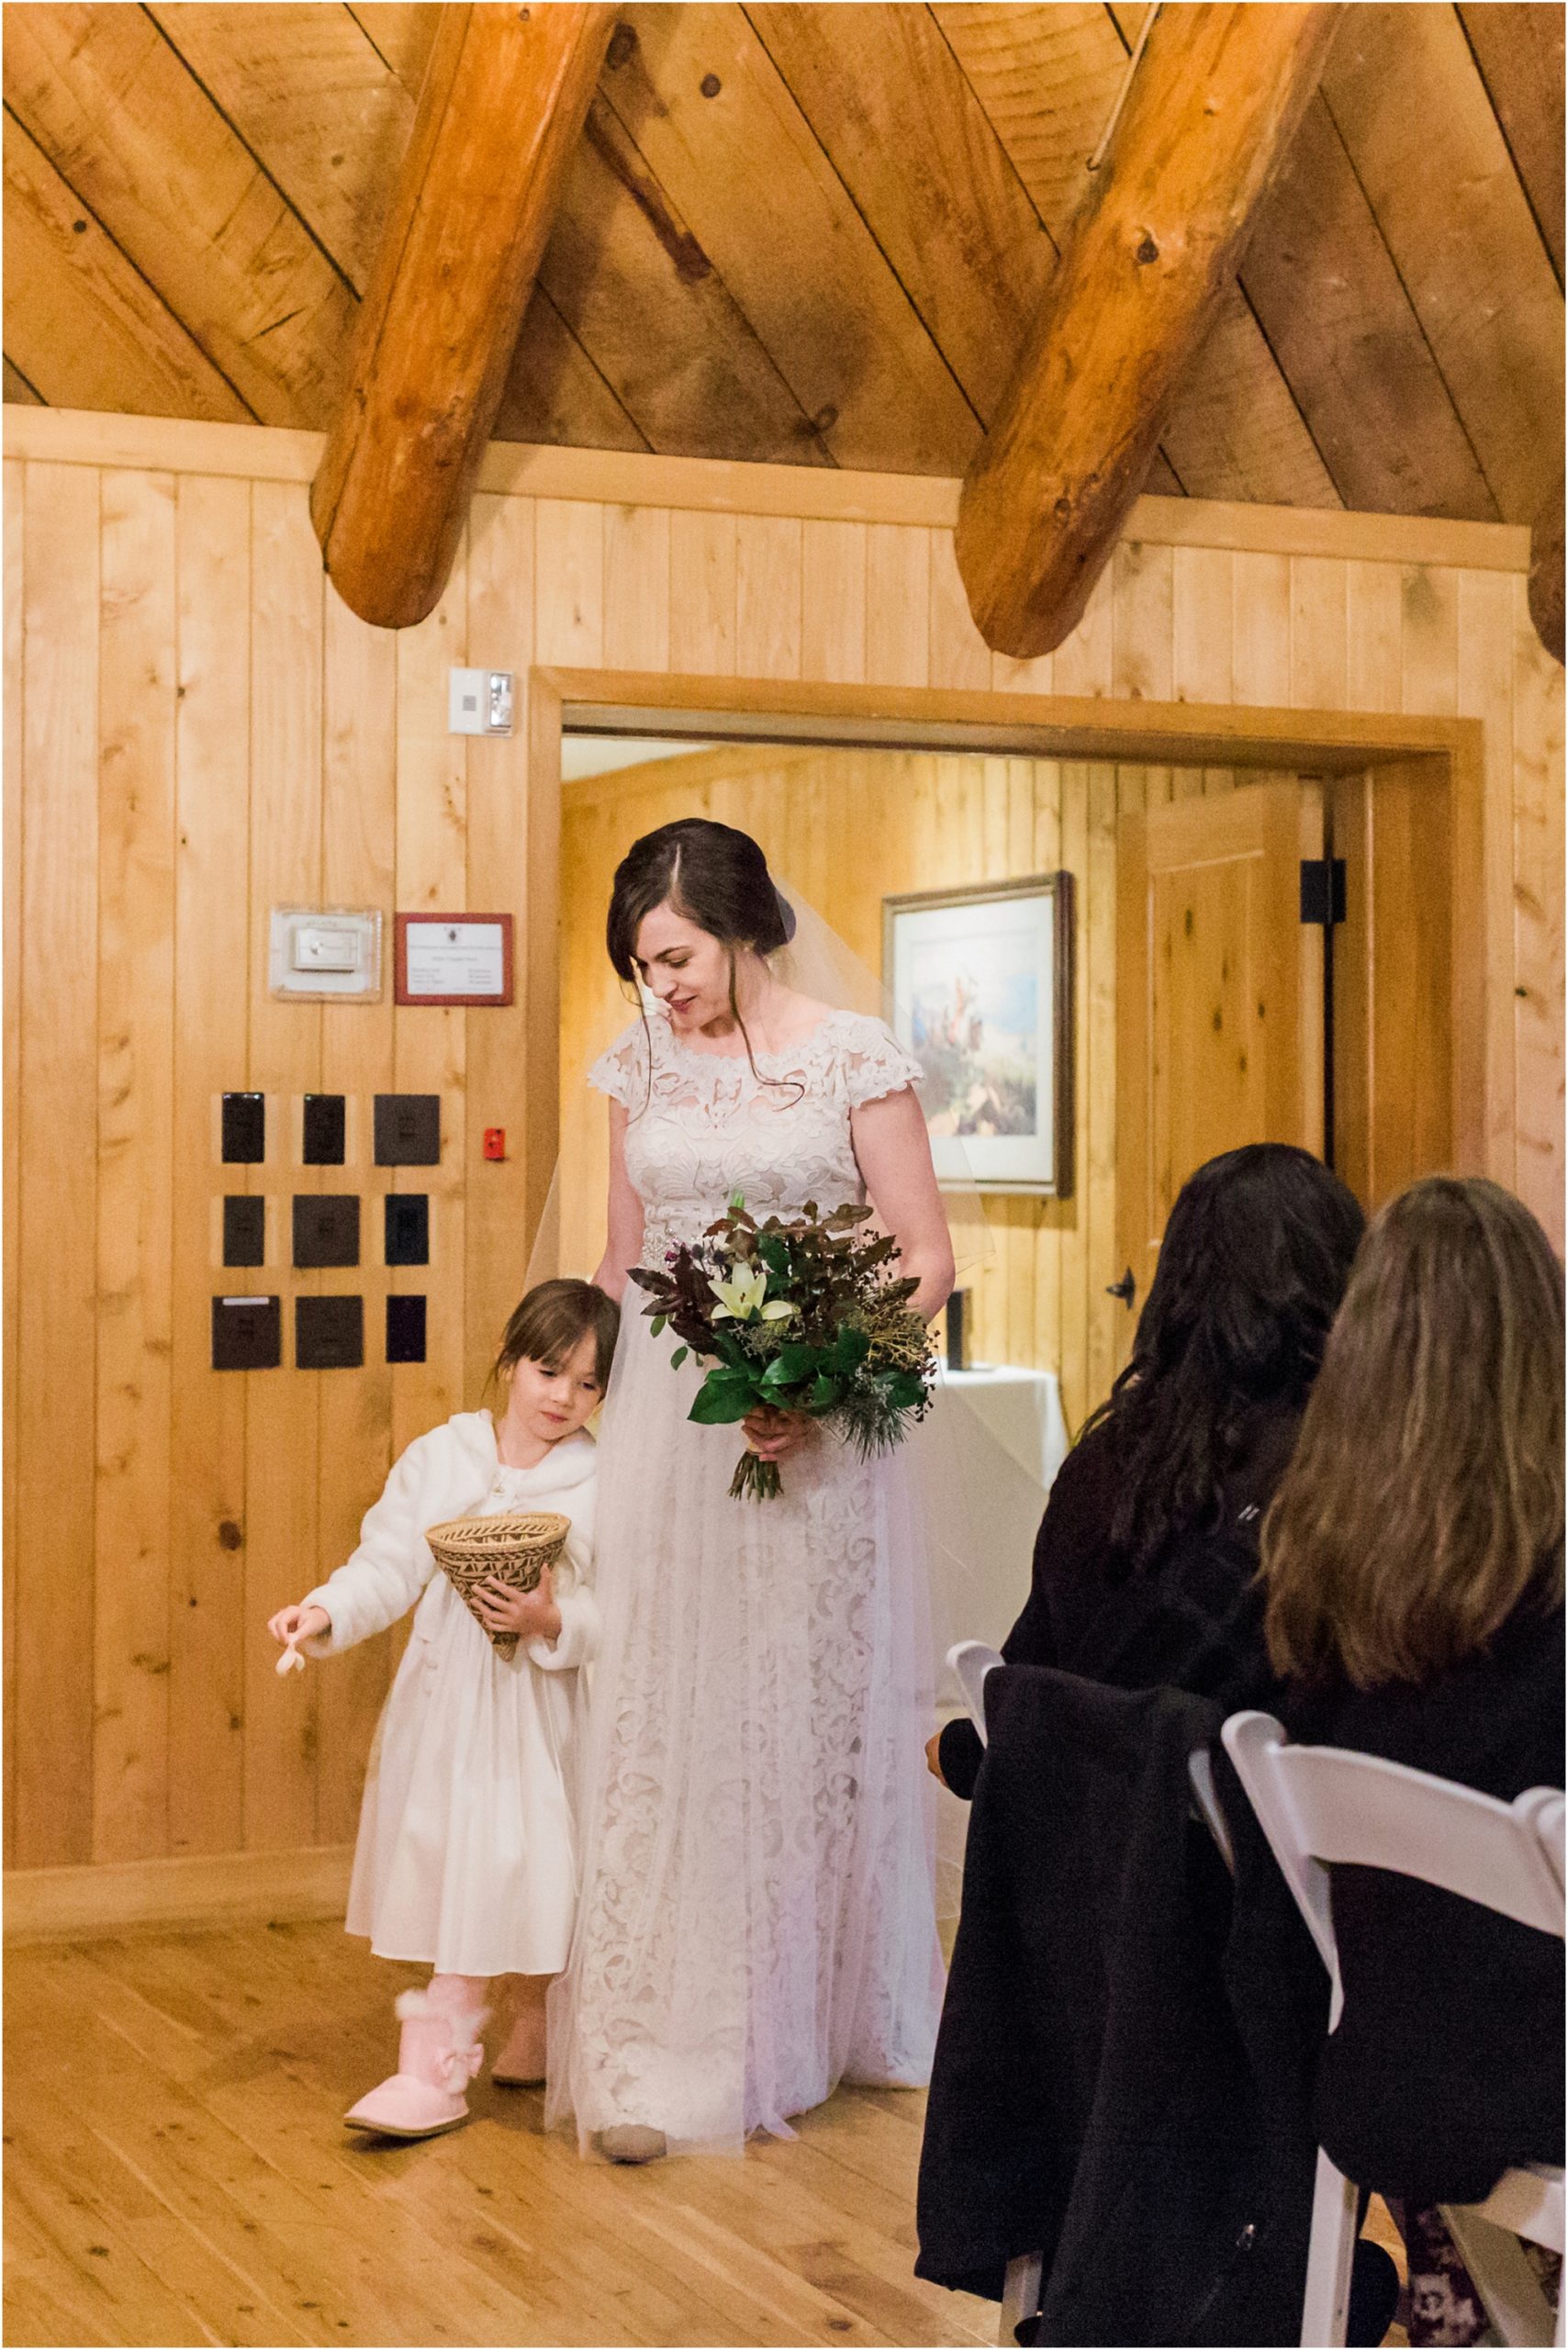 The bride is escorted down the aisle of the gorgeous wooden lodge feel of the Fireside Room at her Sunriver Resort winter wedding in Oregon. | Erica Swantek Photography